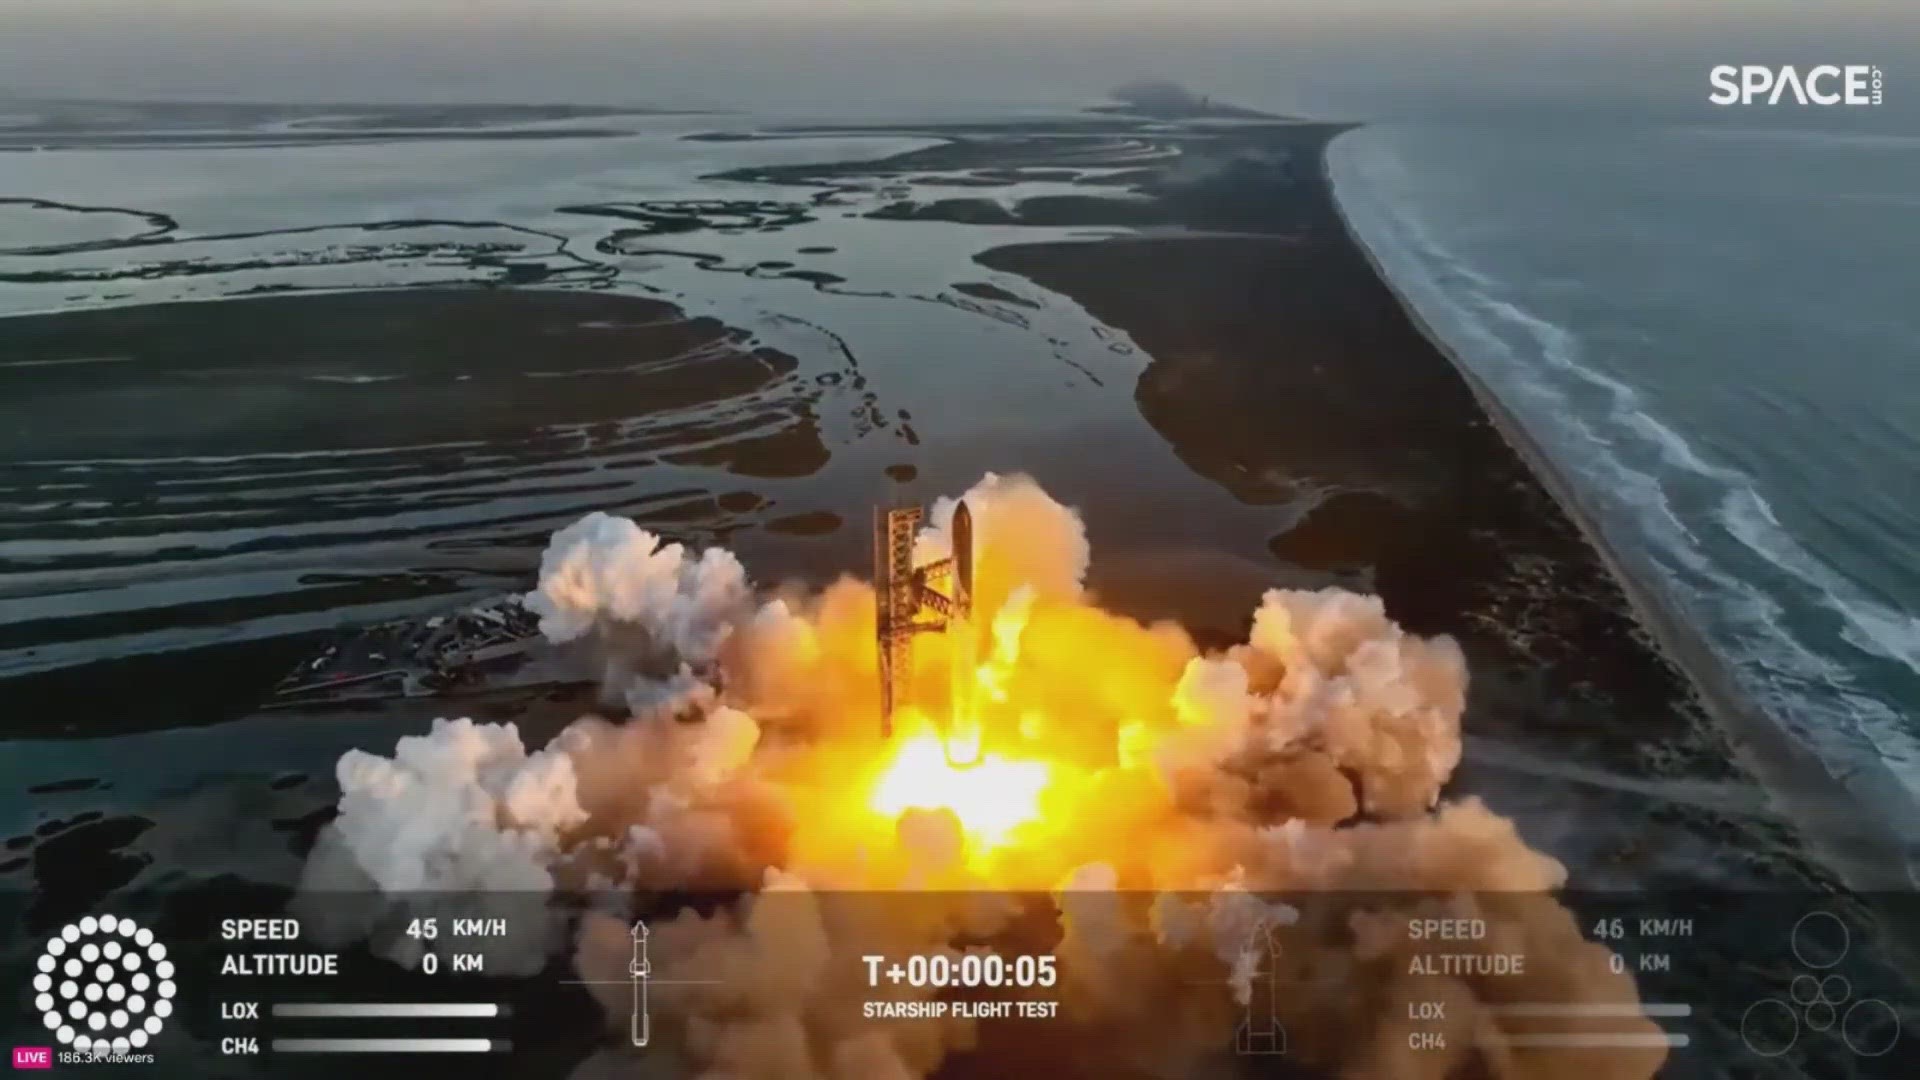 Spacex Launches Its Giant New Rocket In South Texas But A Pair Of Explosions Ends The Second